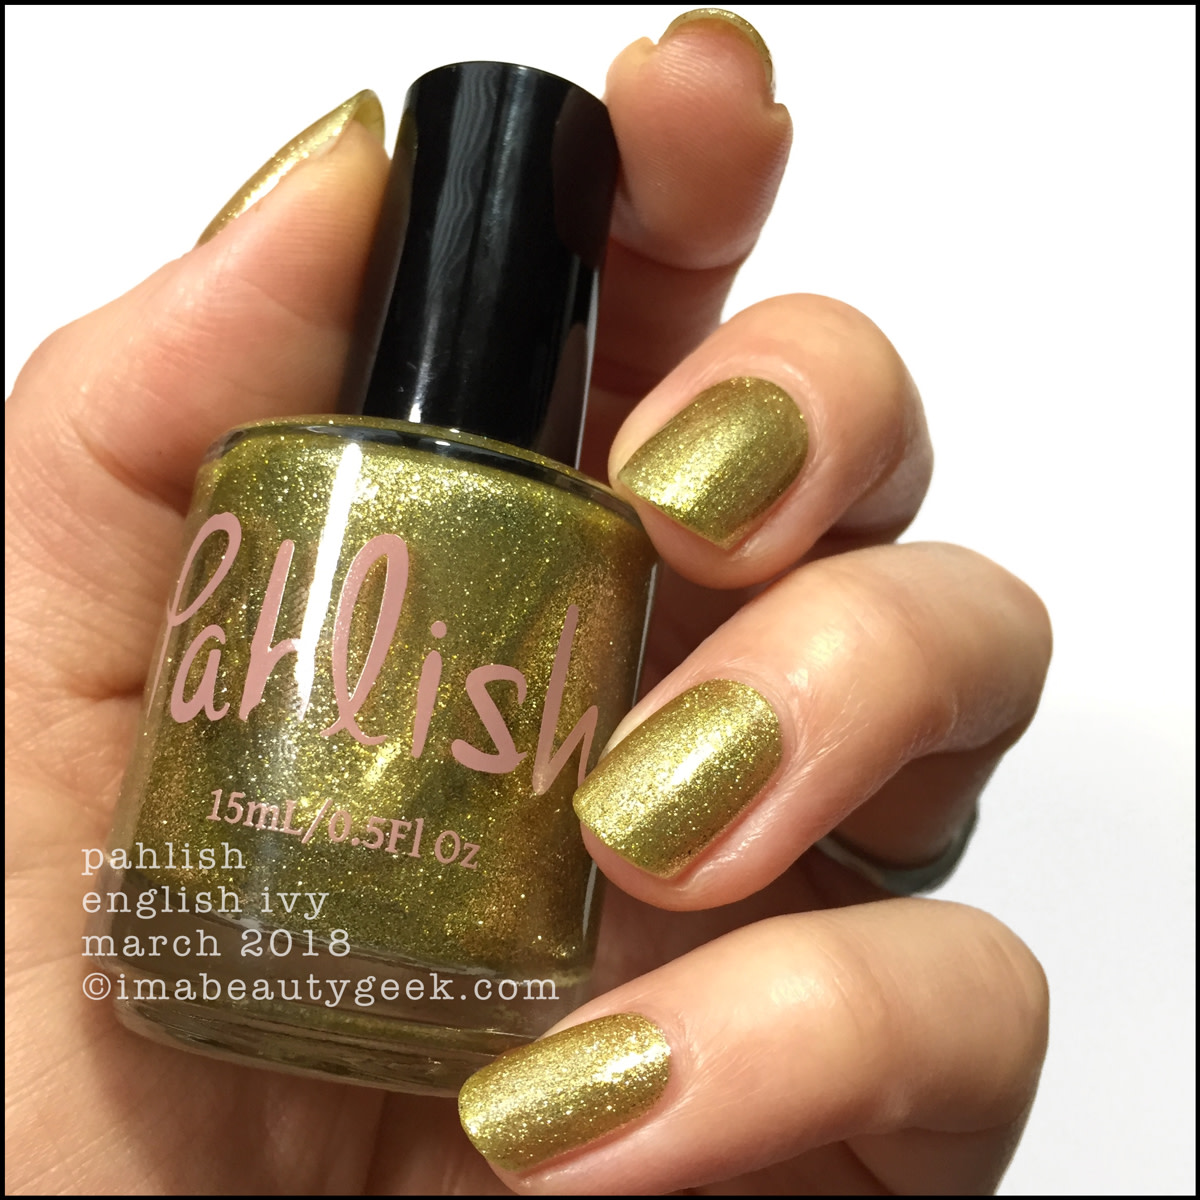 Pahlish English Ivy - March 2018 Collection Swatches